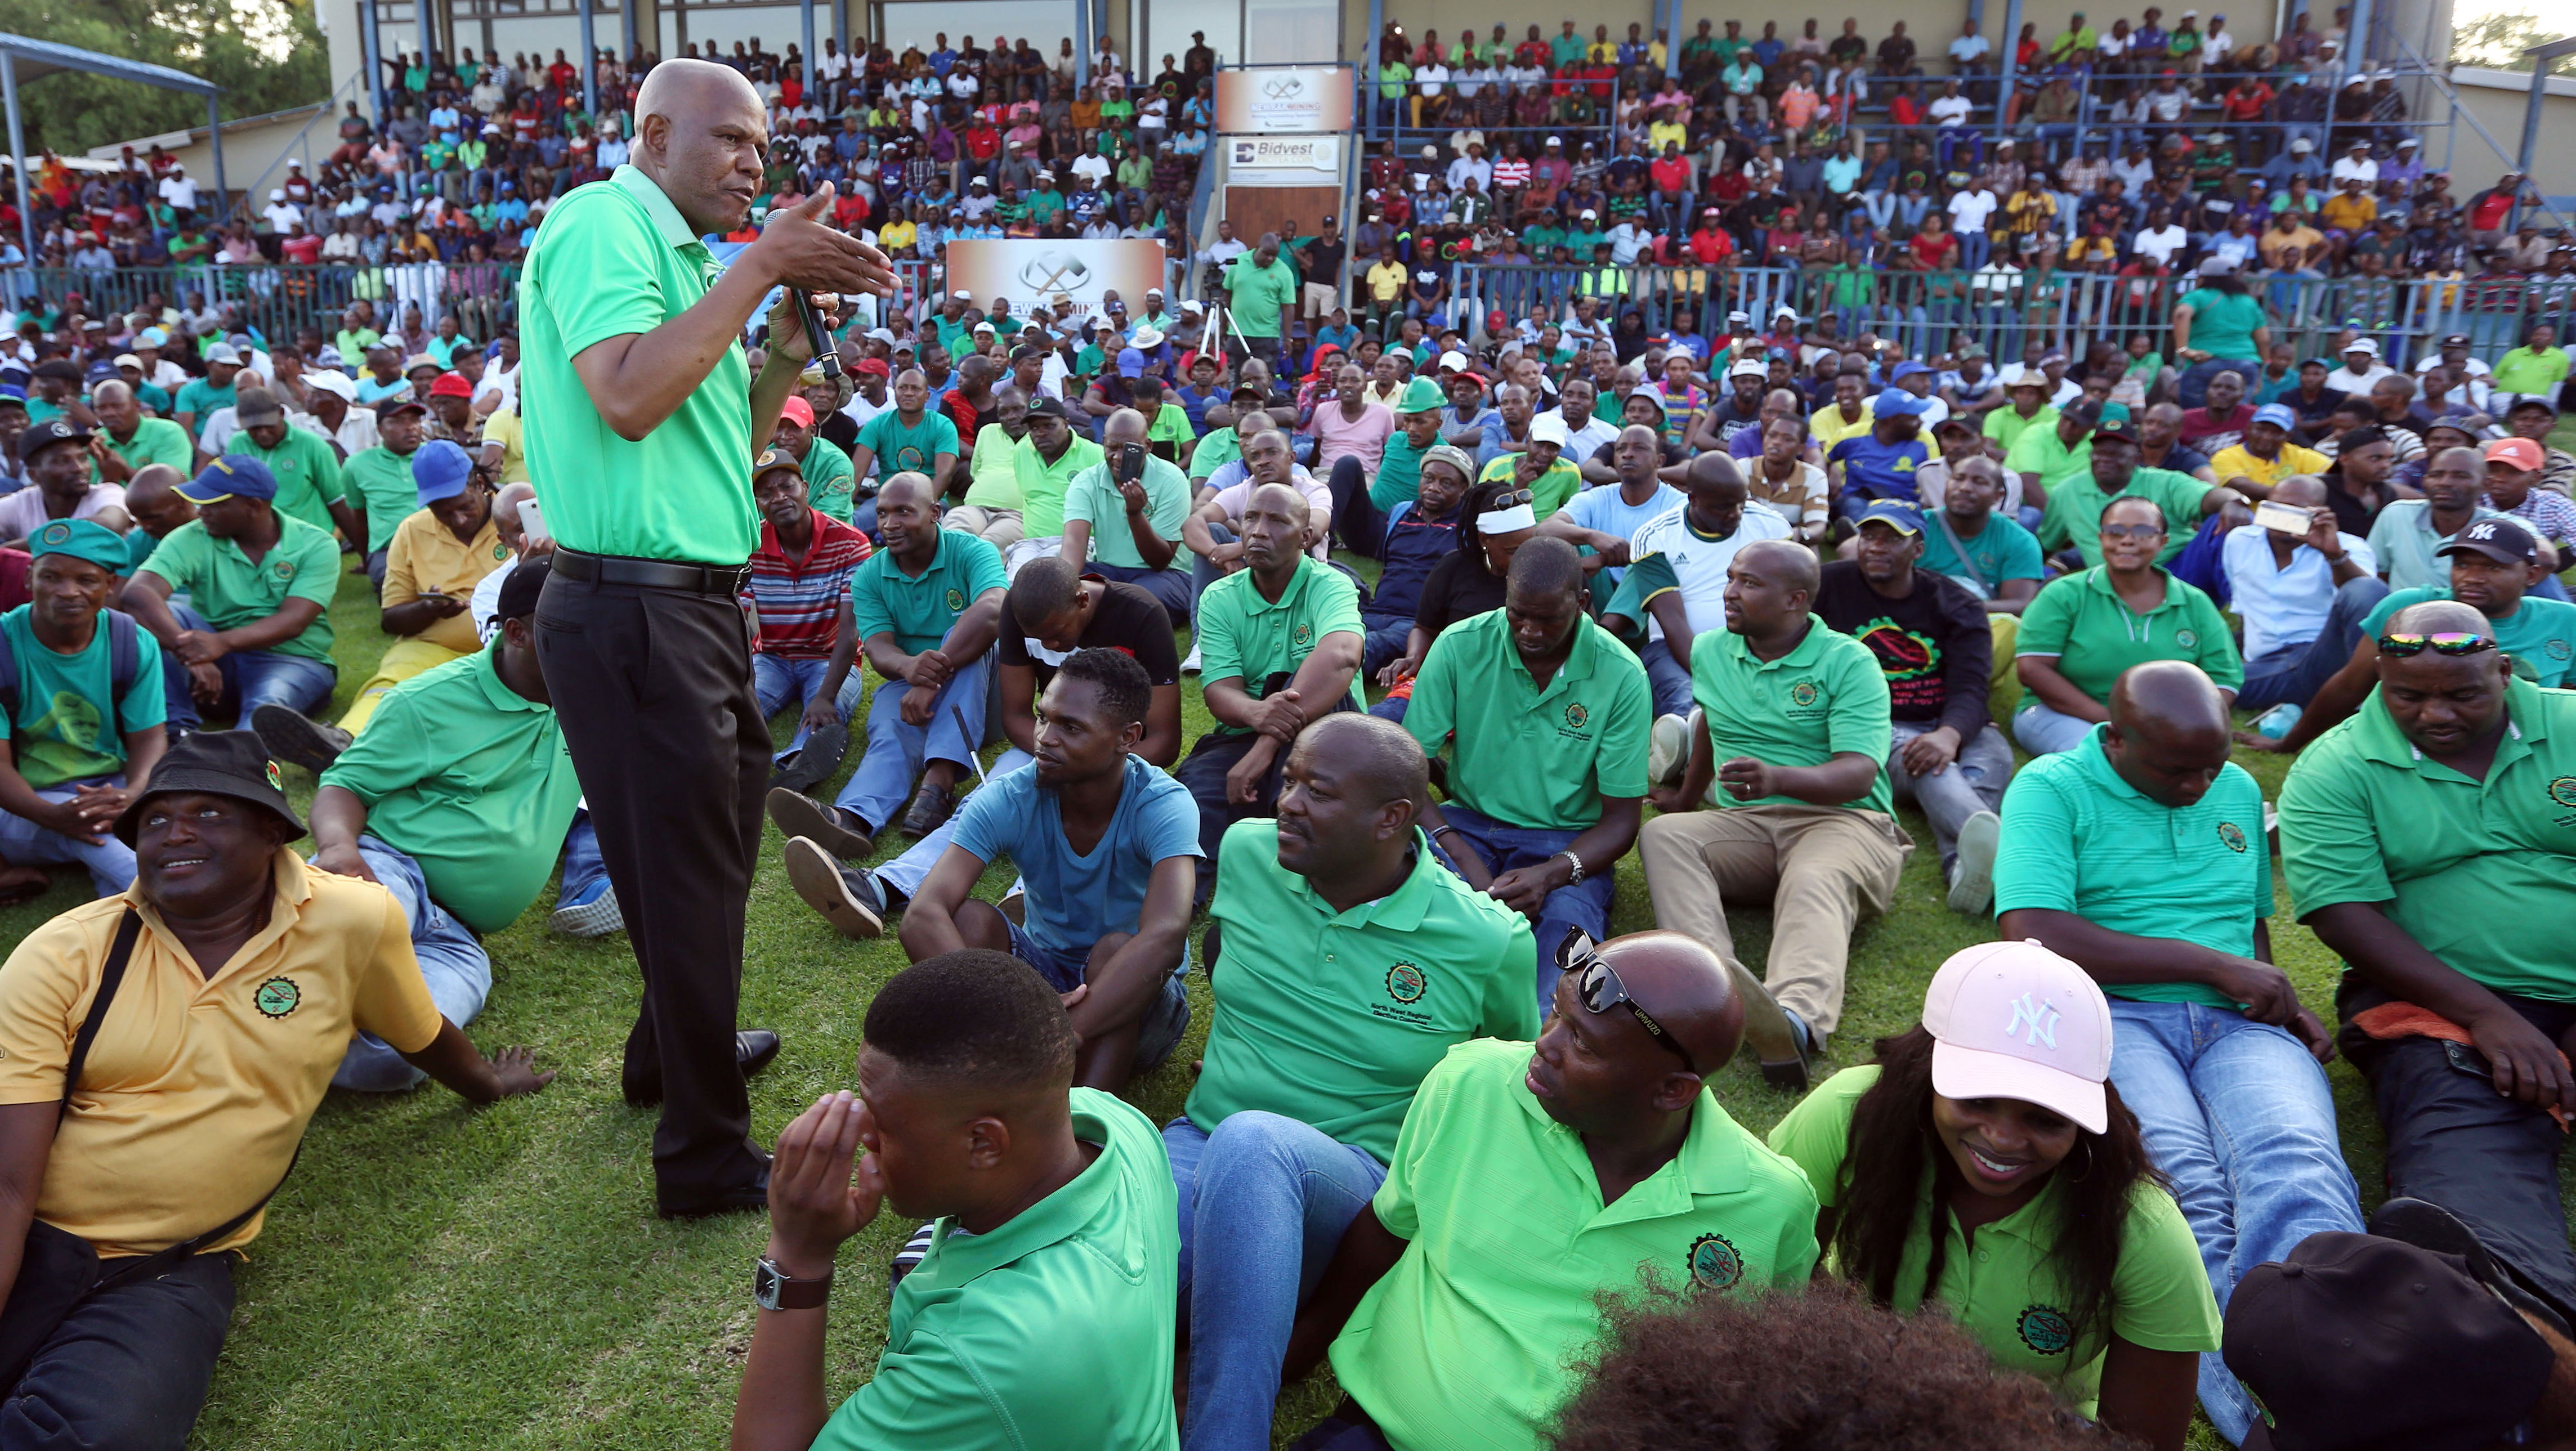 exclusive — amcu says new labour party registered, invites ‘progressive forces’, including other unions, to join